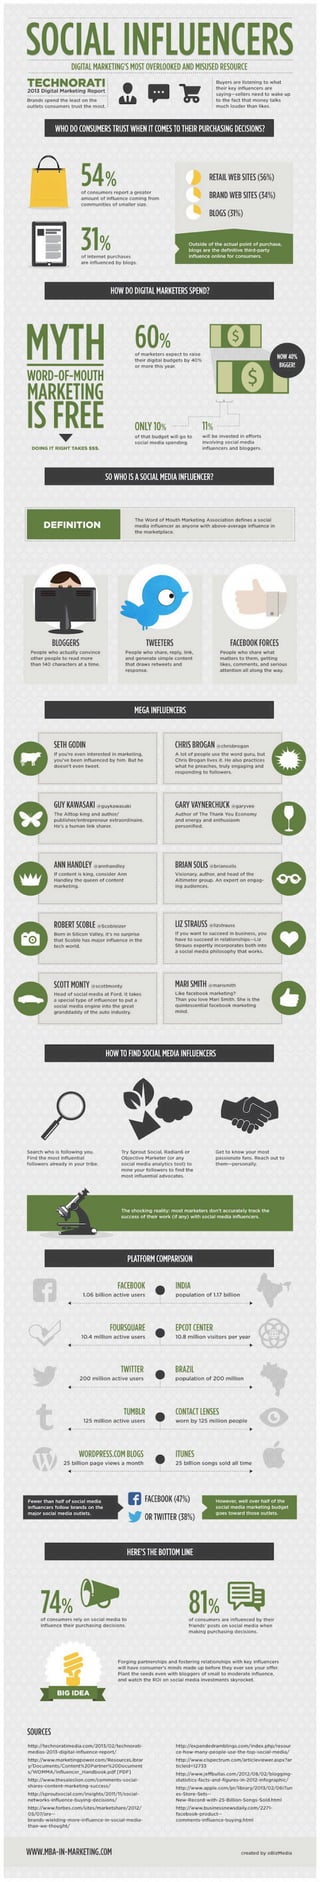 Collaborative IQ with Denise Holt - INFOGRAPHIC Social Influencers